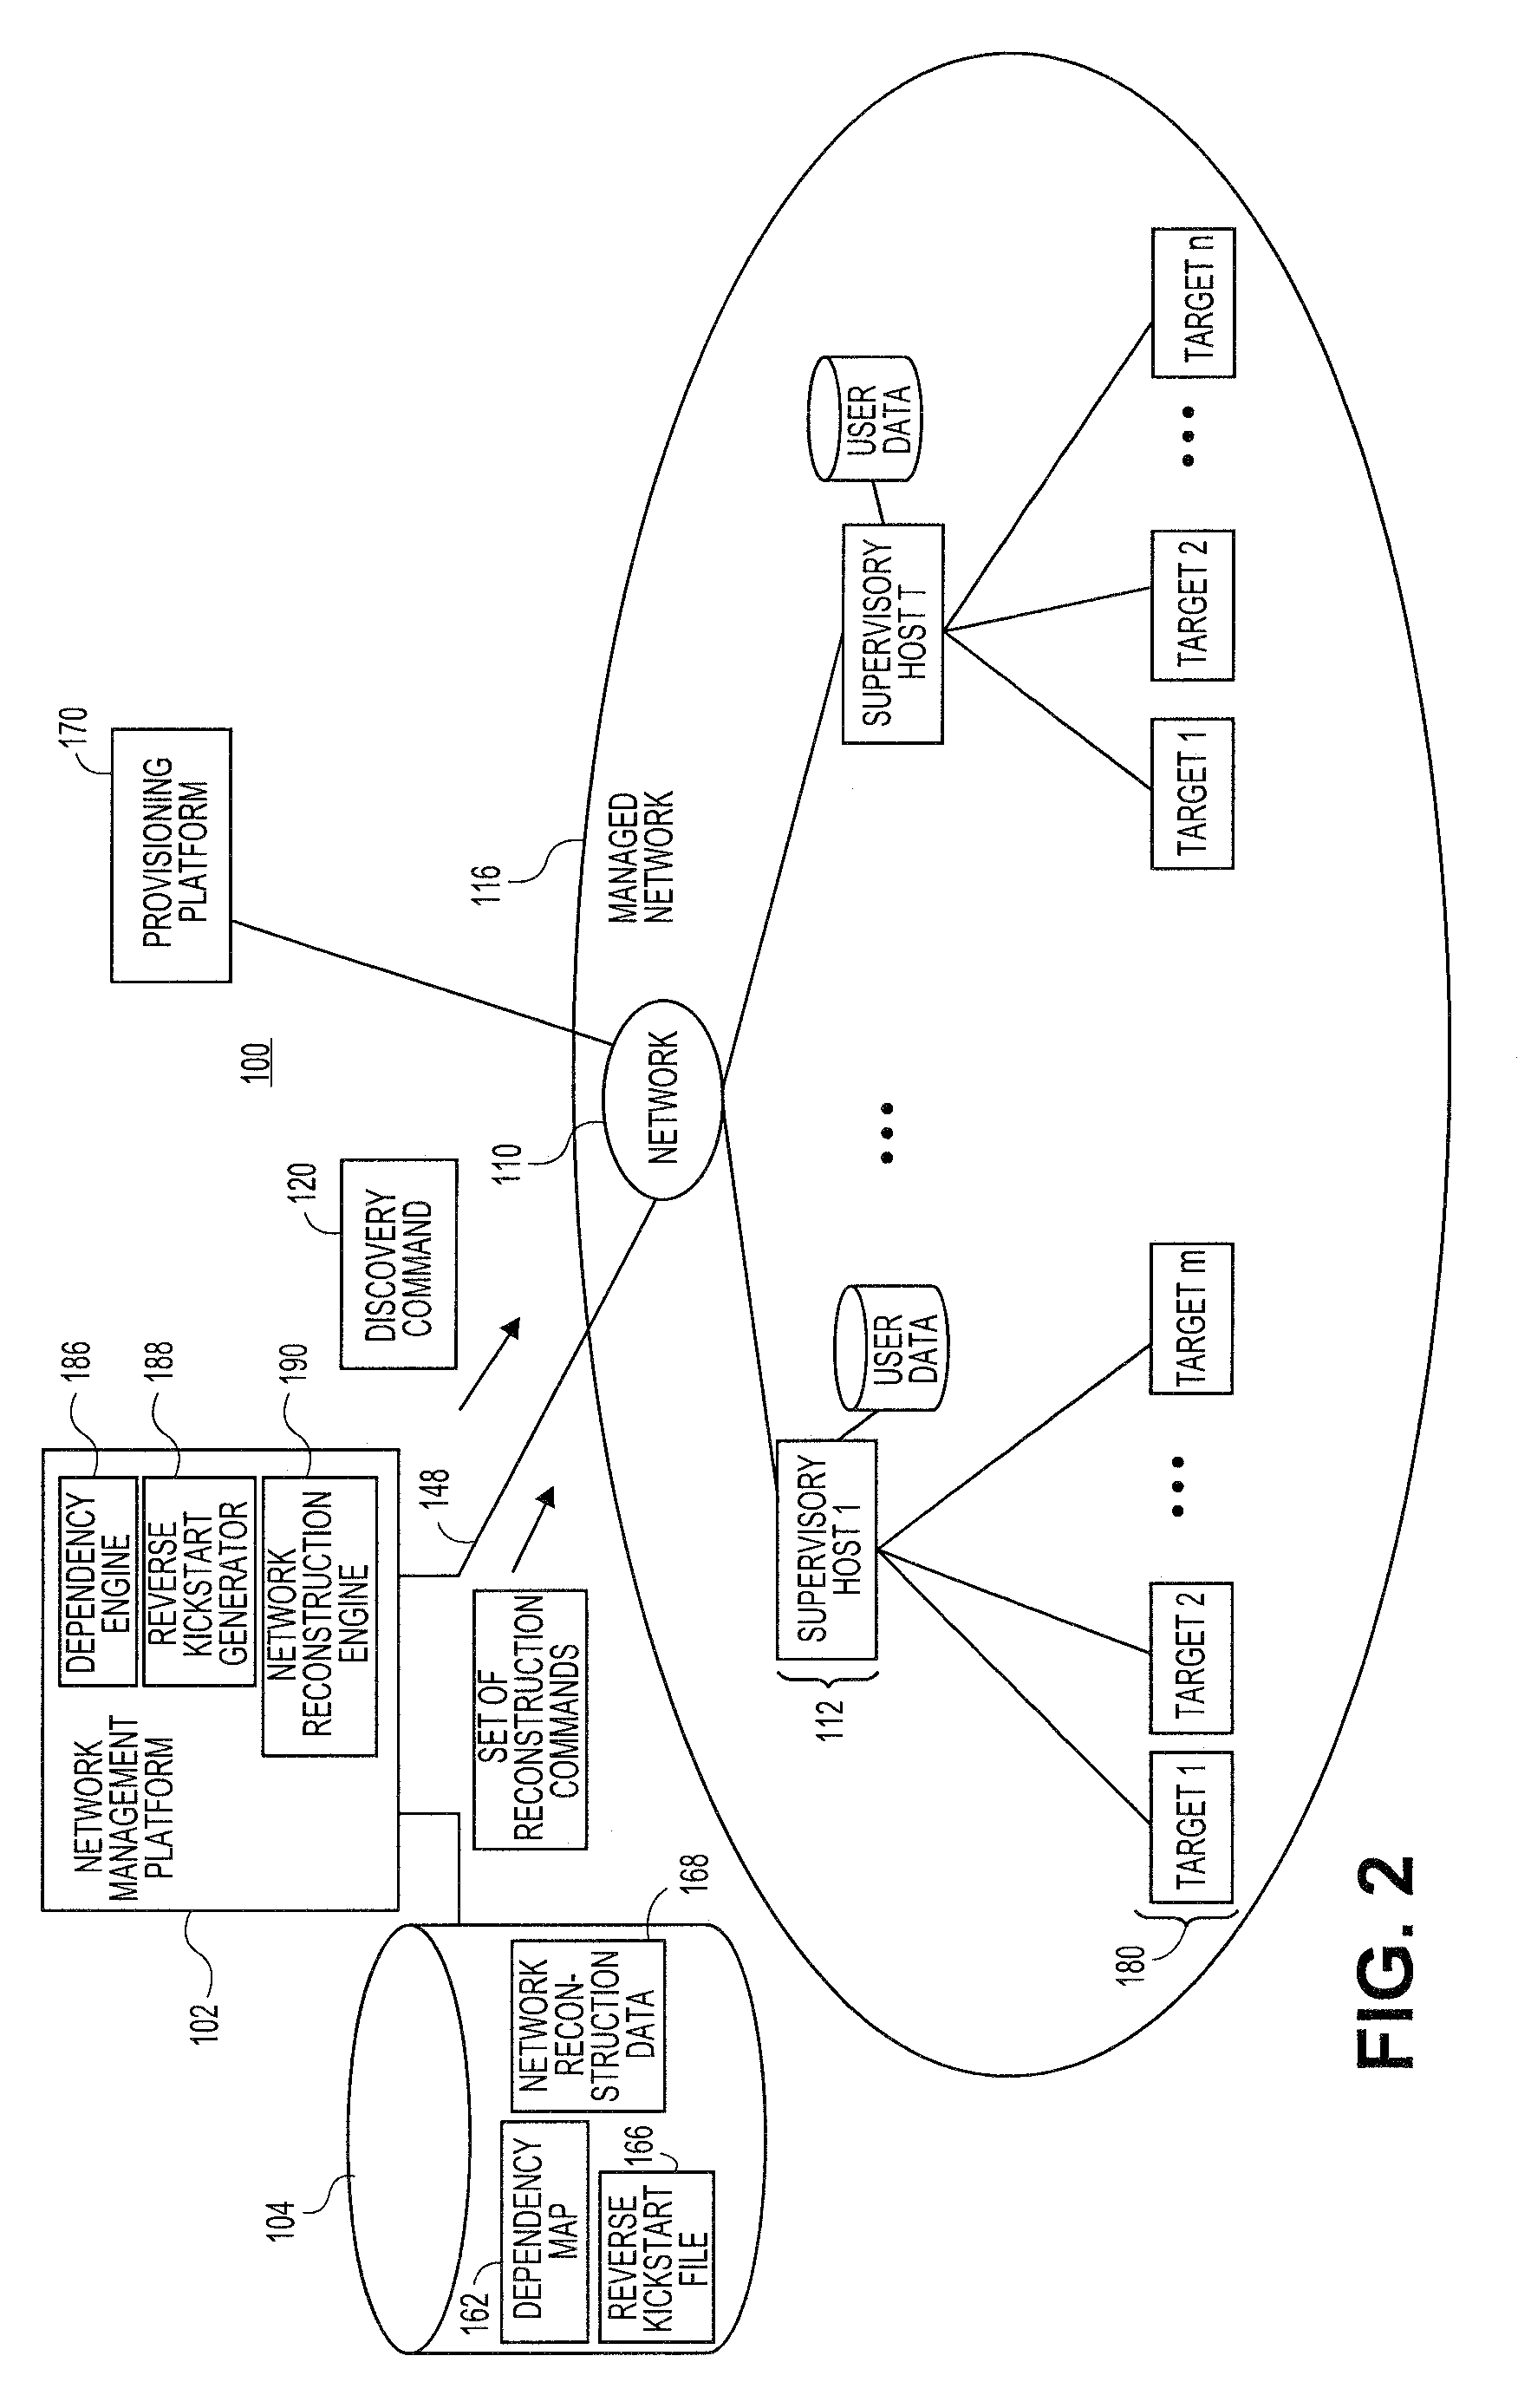 Systems and methods for automatically generating system restoration order for network recovery